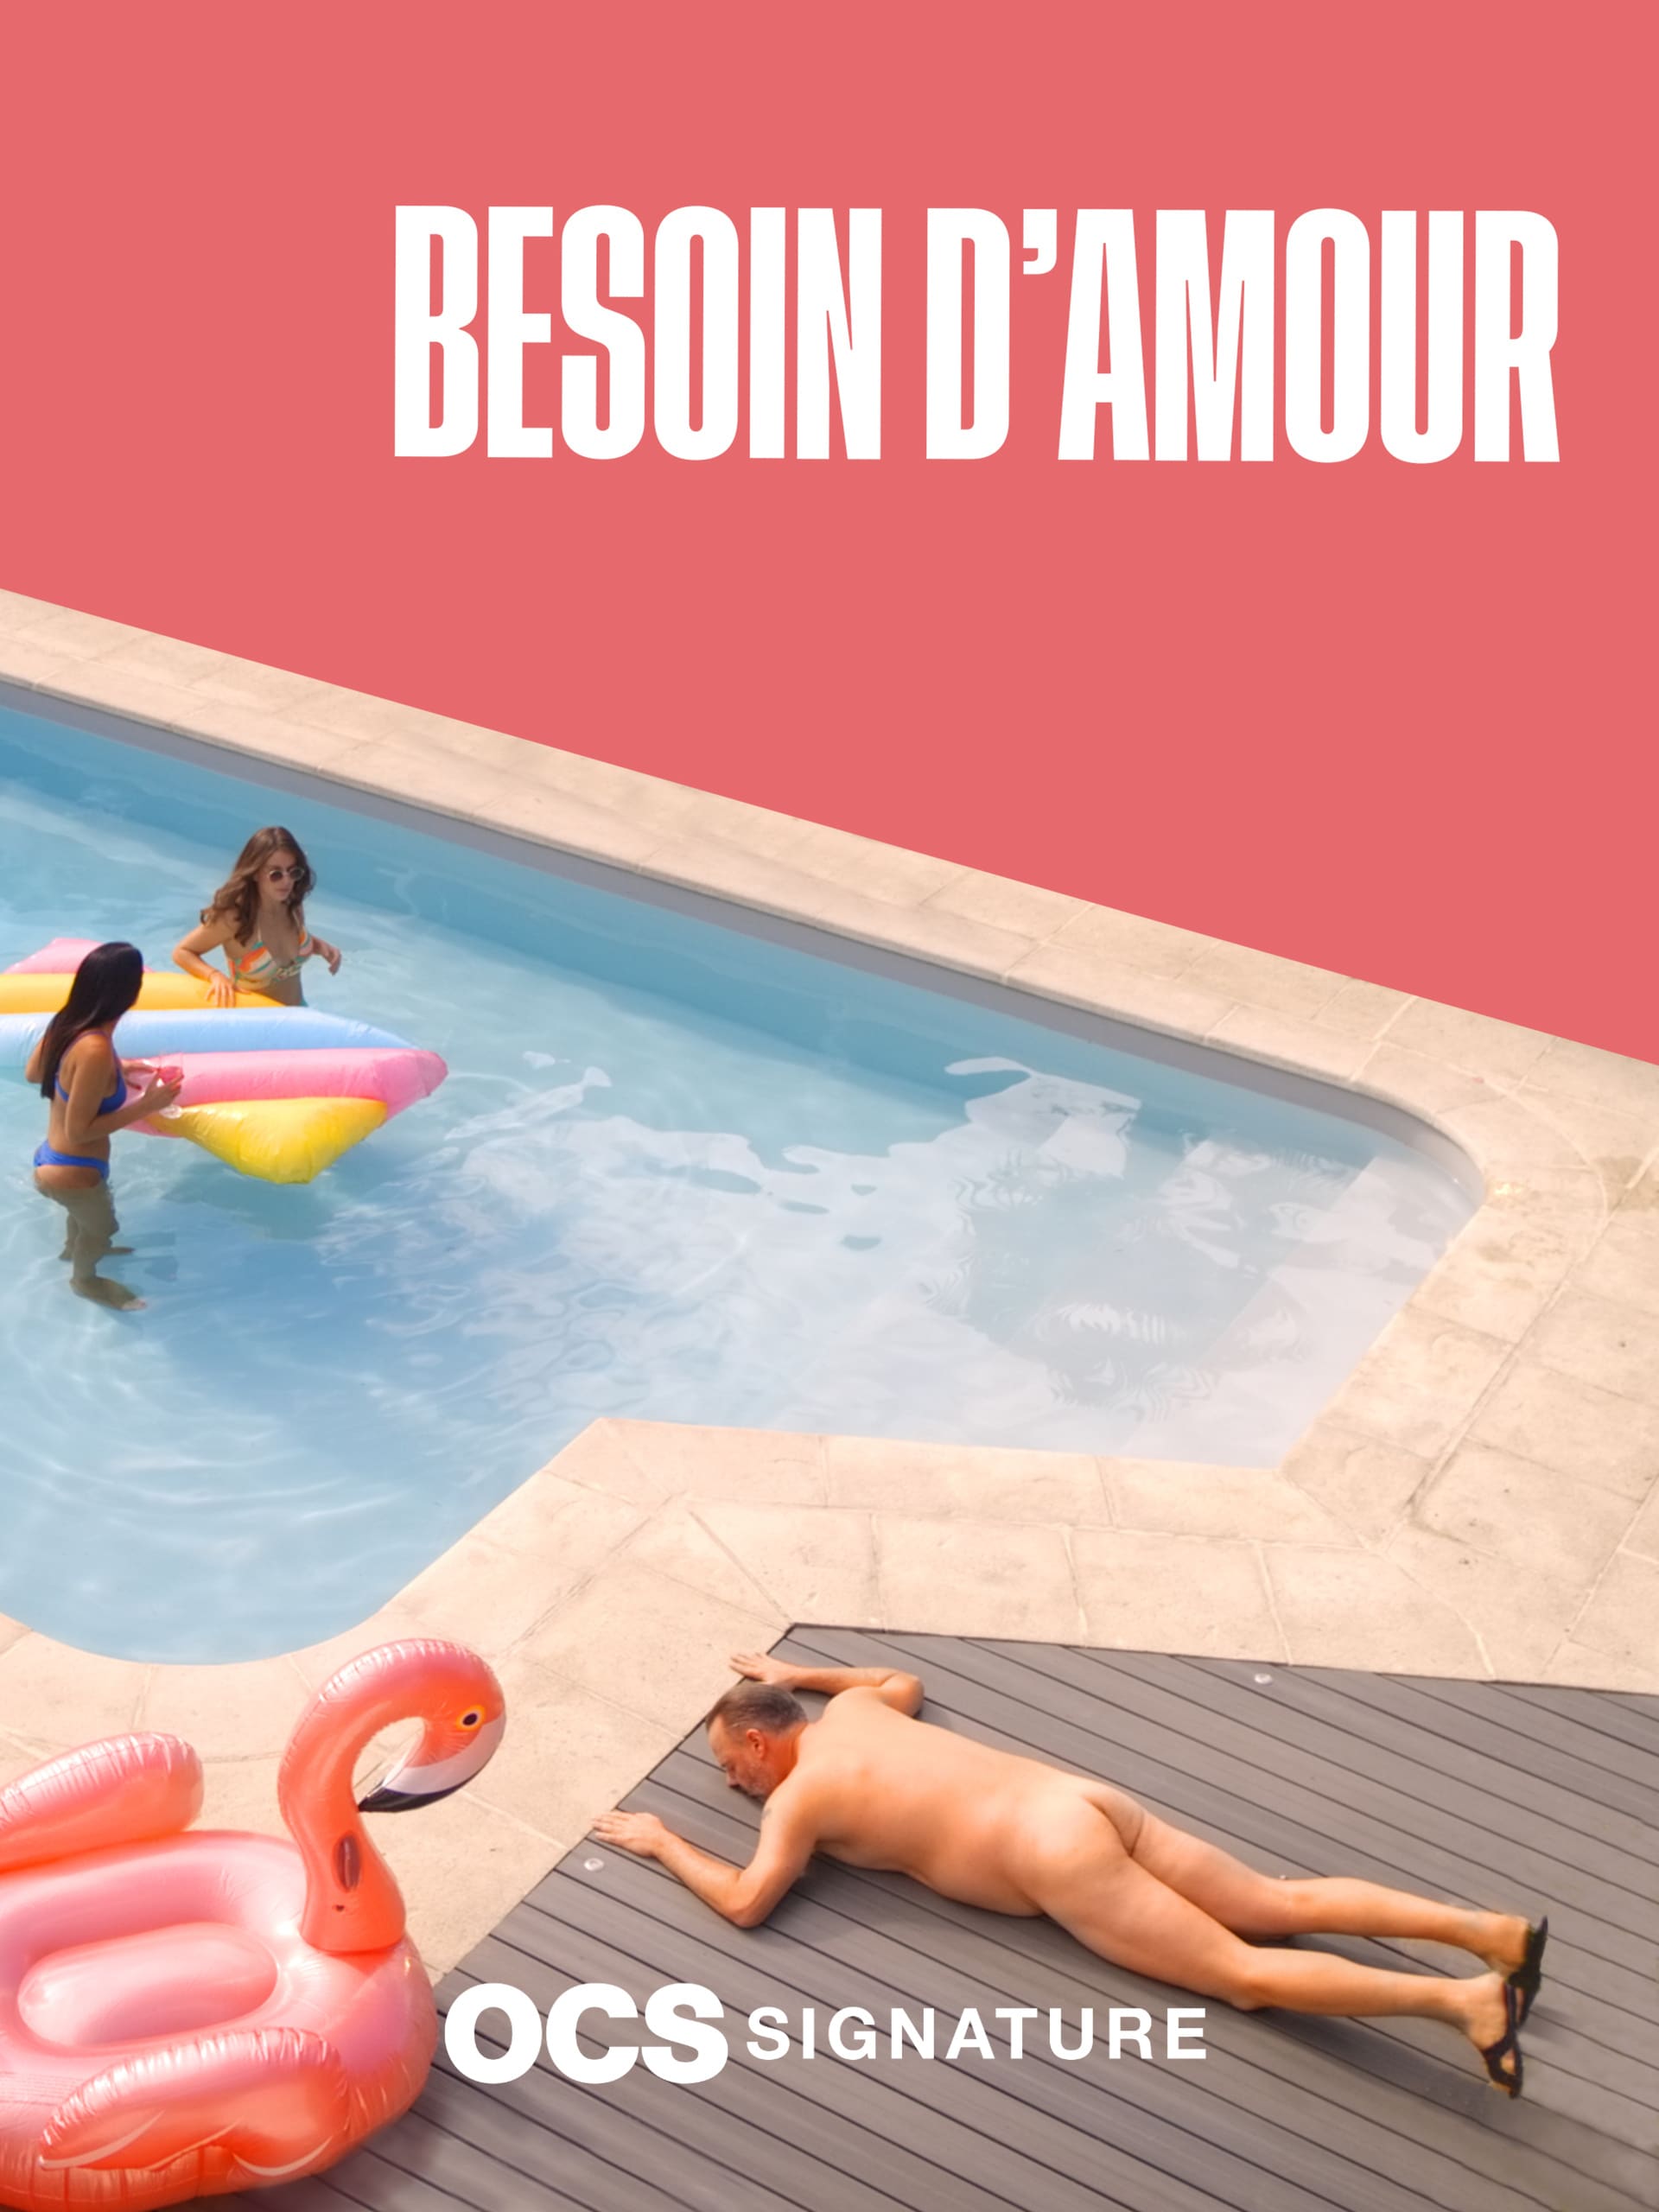 Besoin d'amour